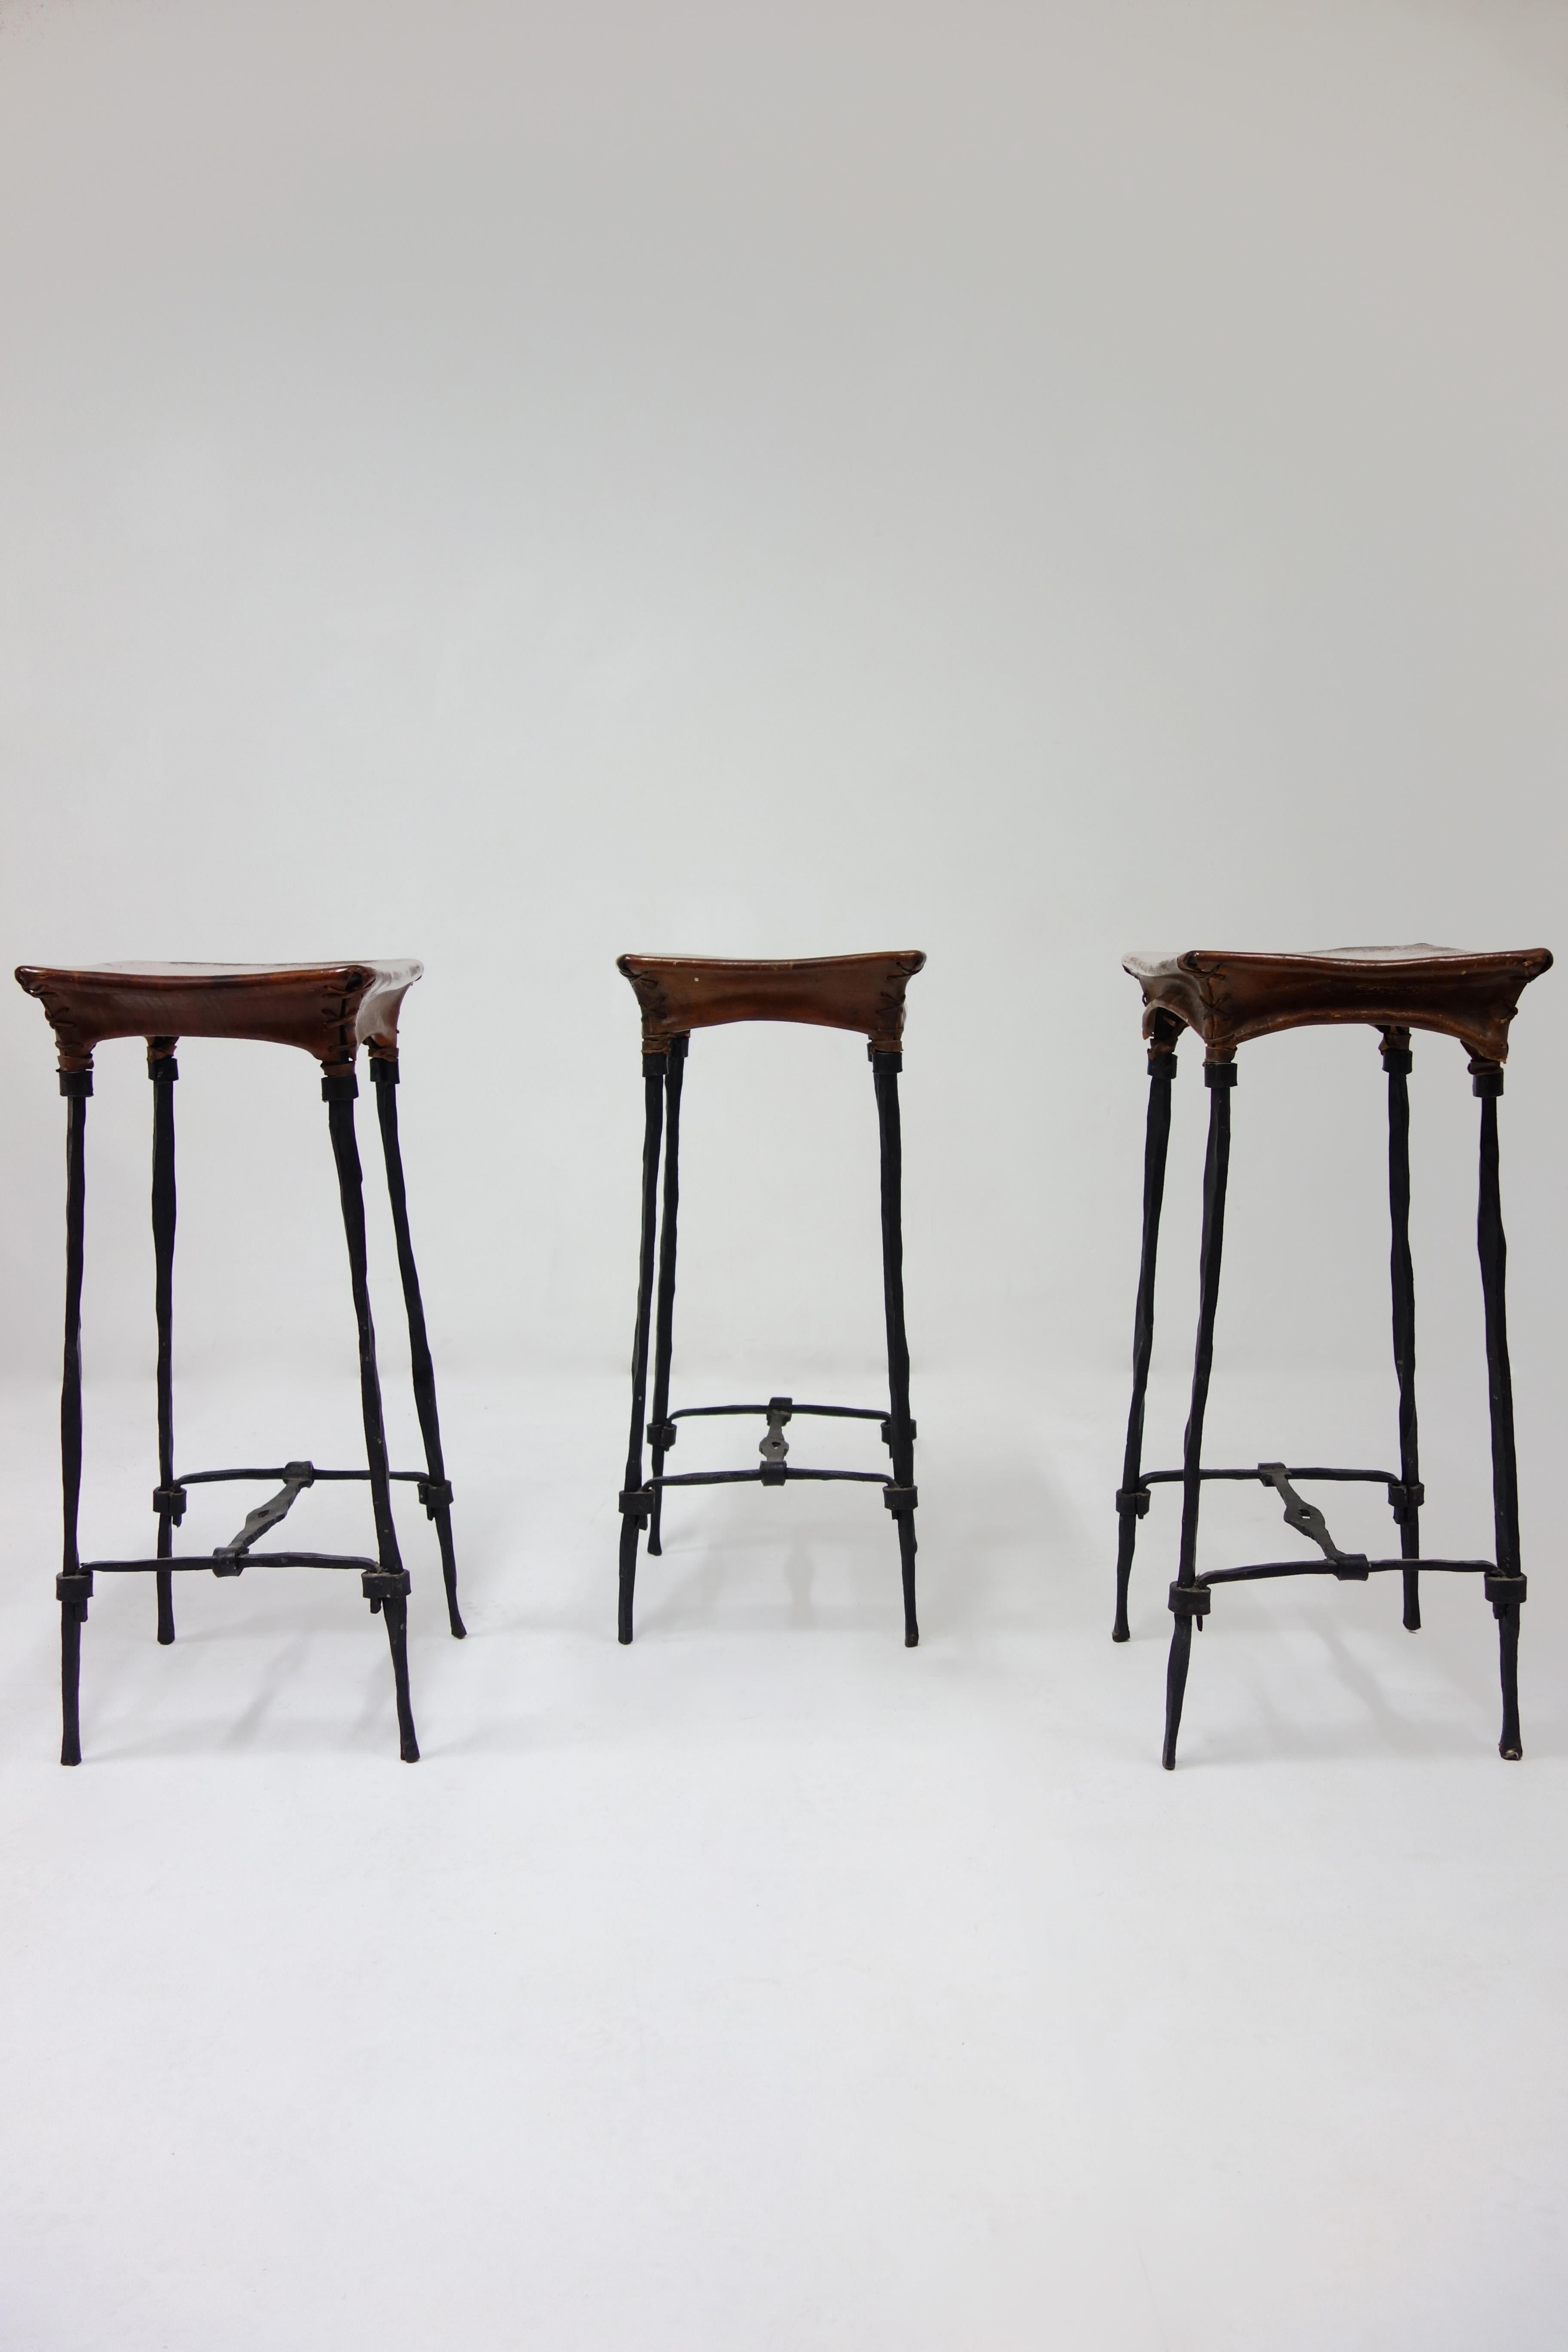 Set of 3 bar stool by François & Sido Thevenin with a black wrought iron structure and avbrown patina leather. François and Sido Thevenin give life to metal thanks to their great mastery of forging. This model is rare in this bar stool version. 
 